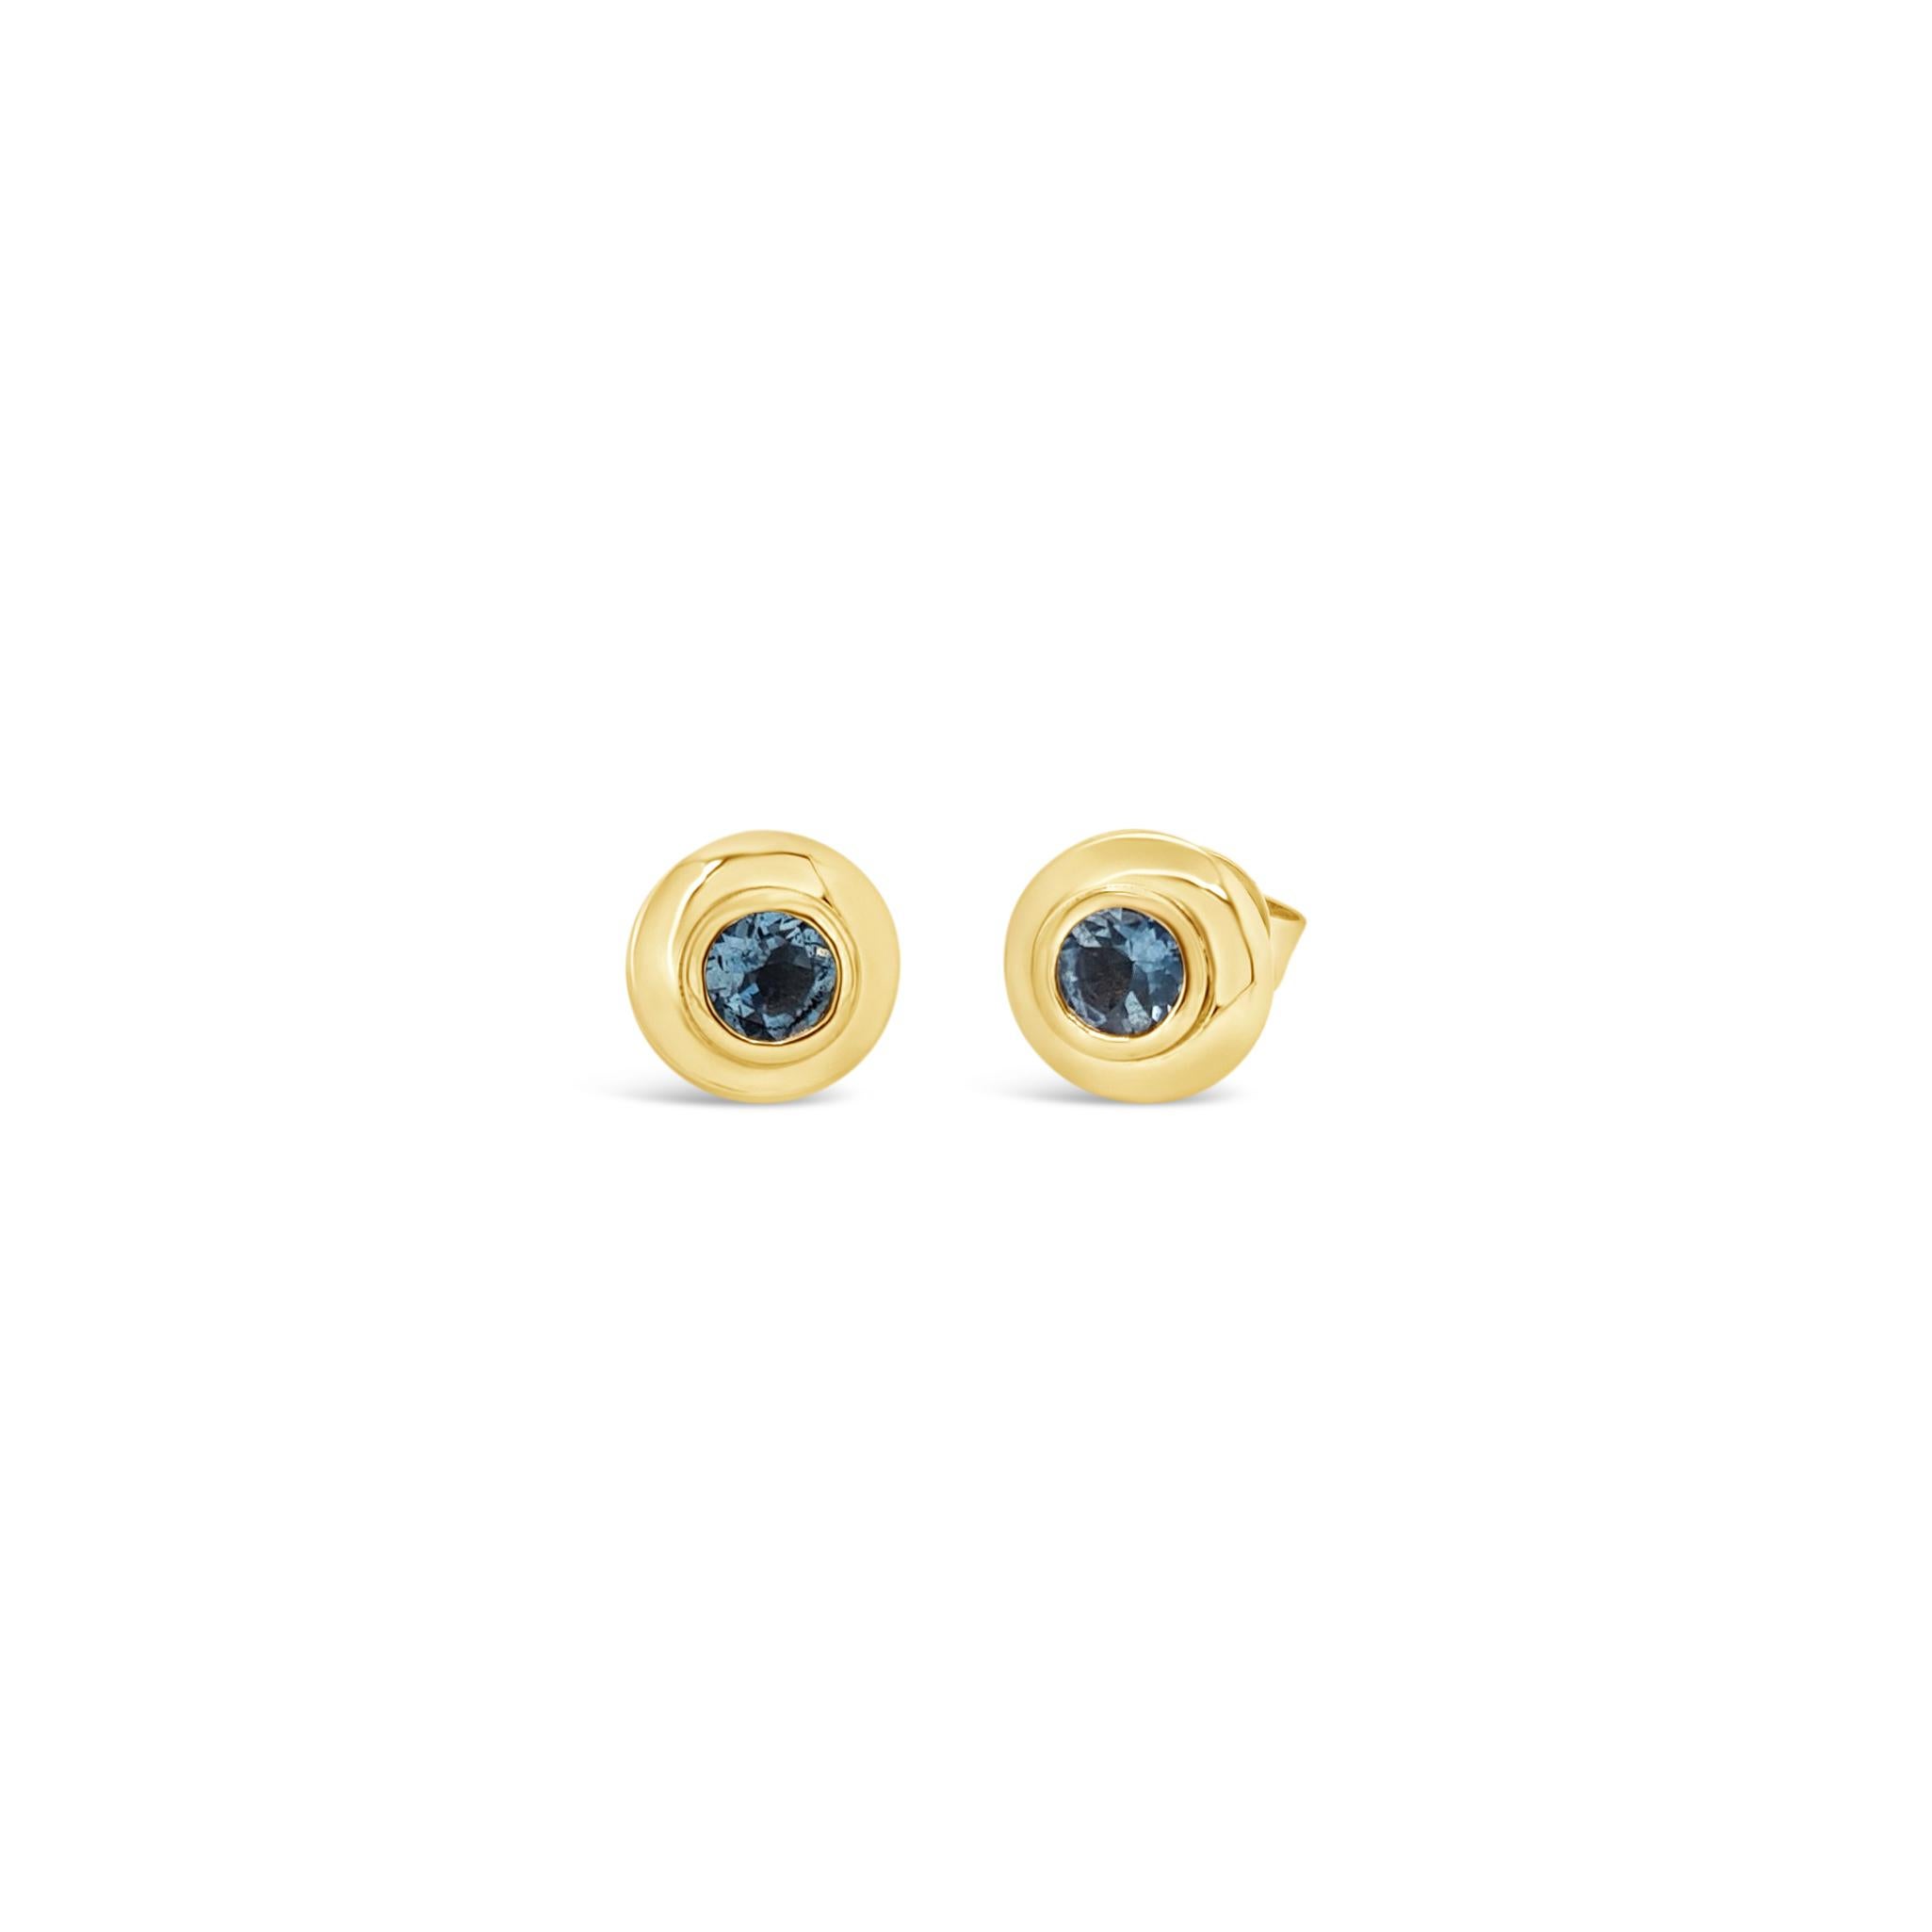 These cute 18ct yellow gold 